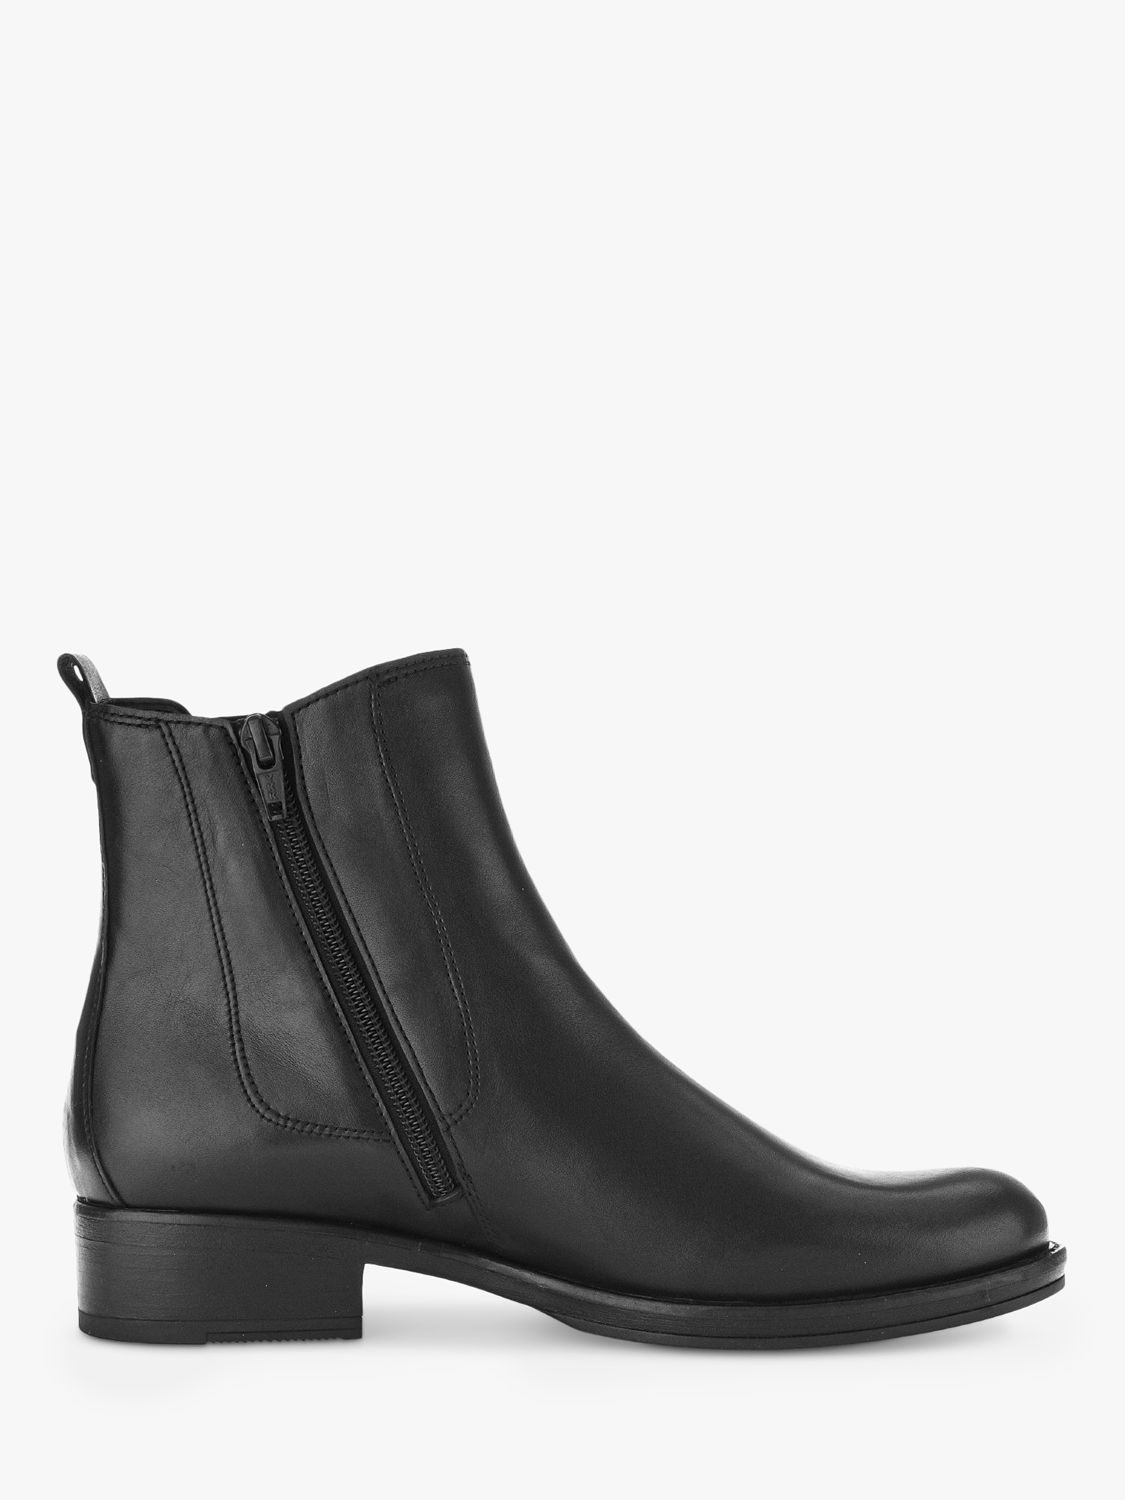 Gabor Adair Leather Chelsea Boots, Black, 3